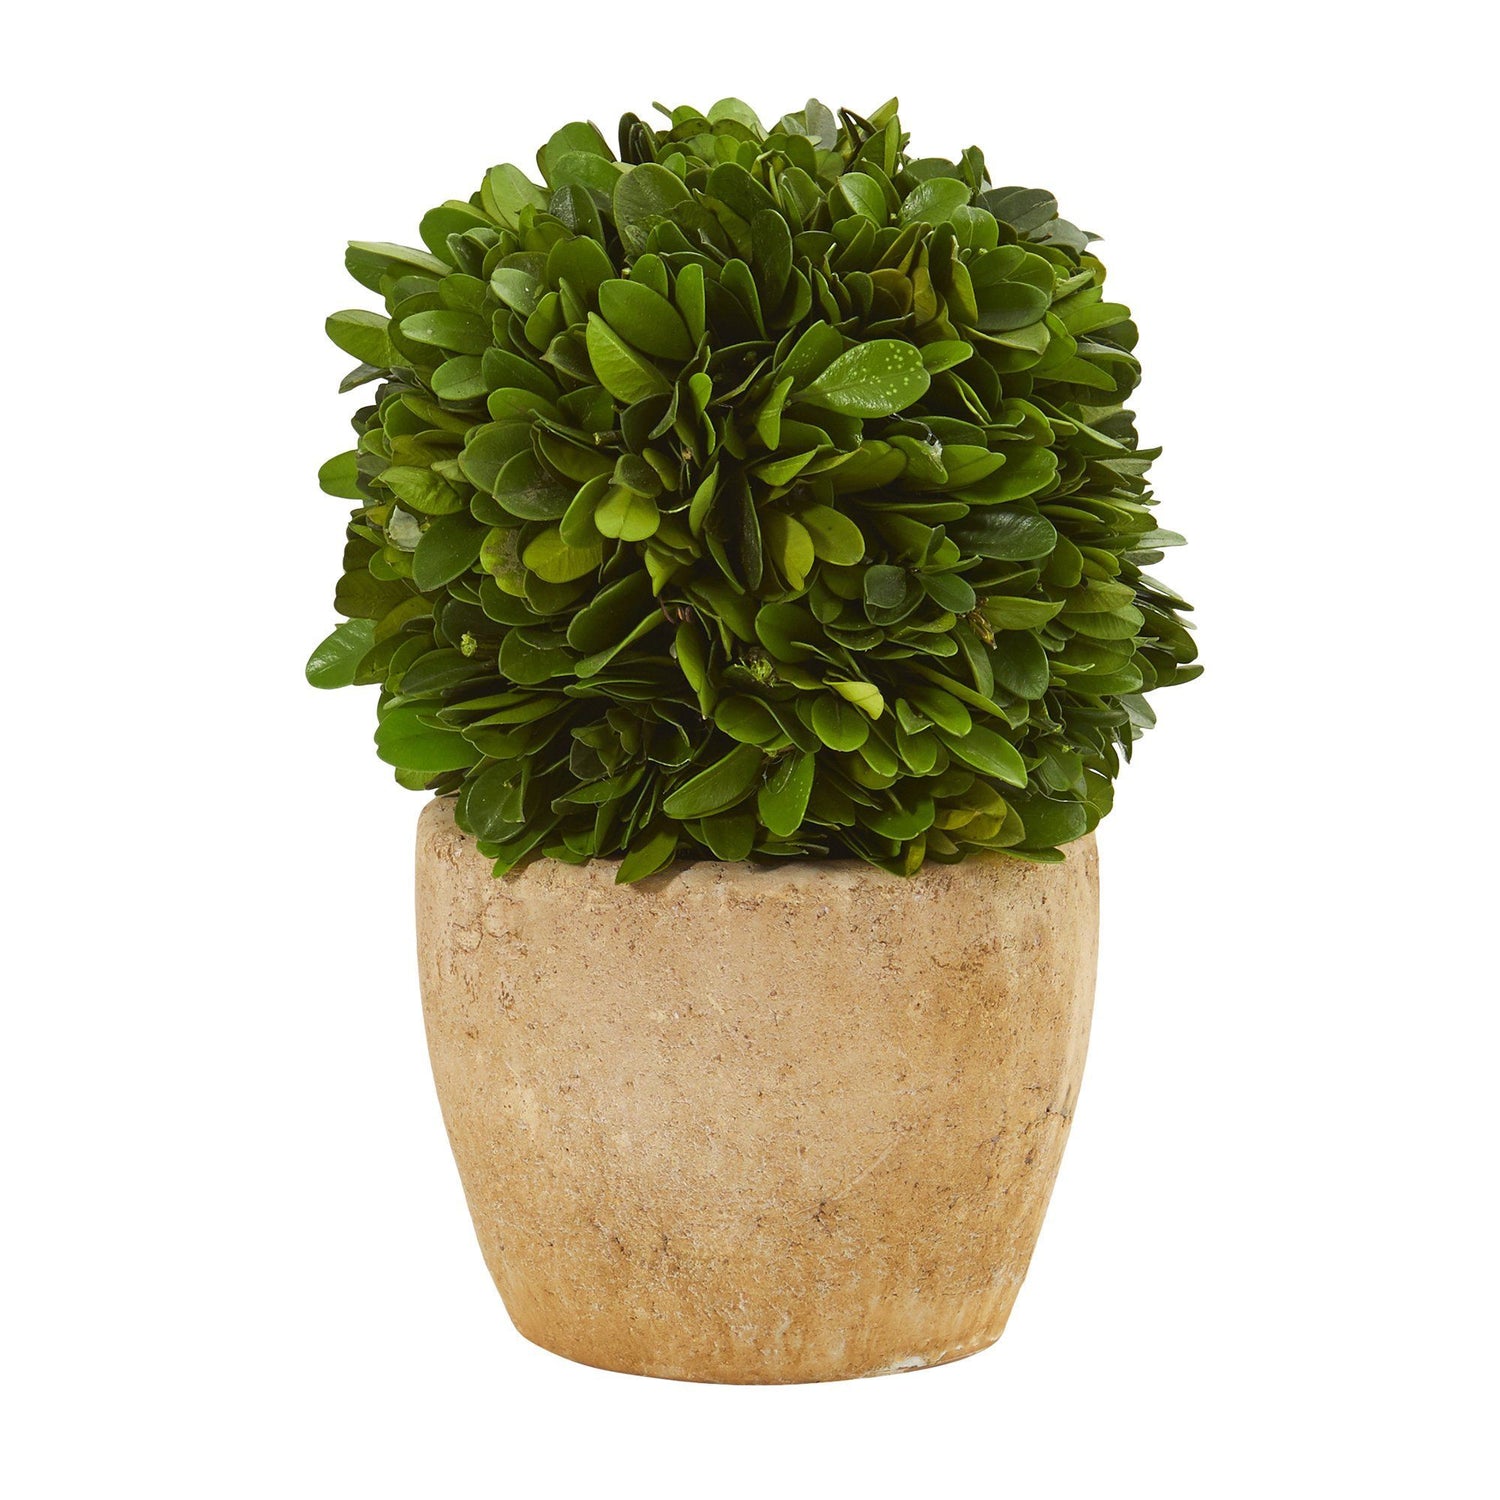 7” Boxwood Ball Preserved Plant in Decorative Planter (Set of 2)